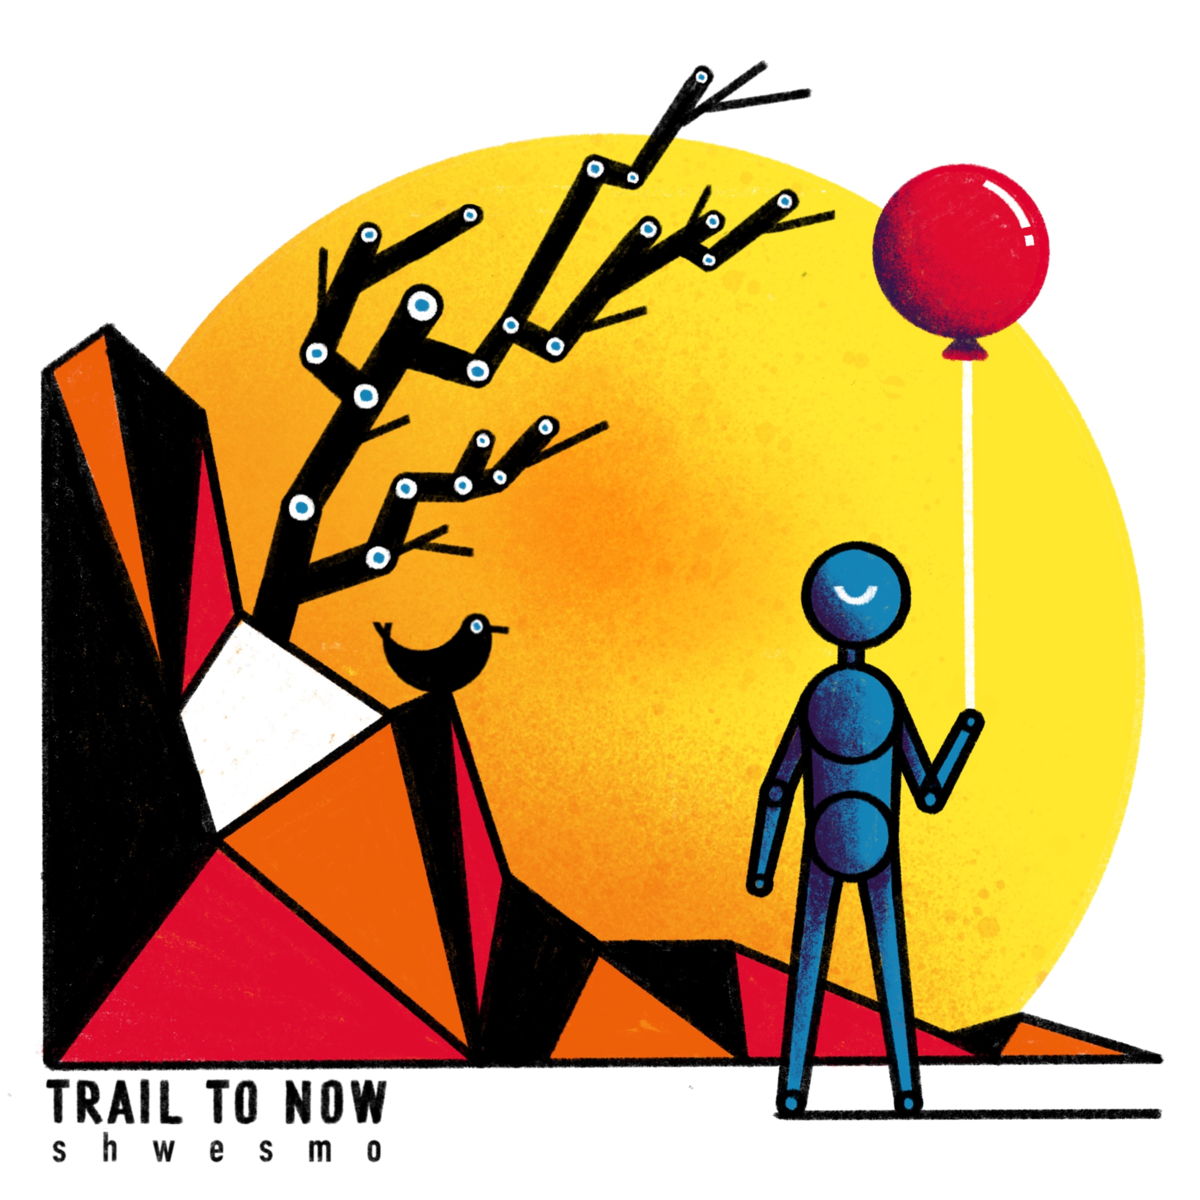 Shwesmo's most recent album 'Trail To Now'